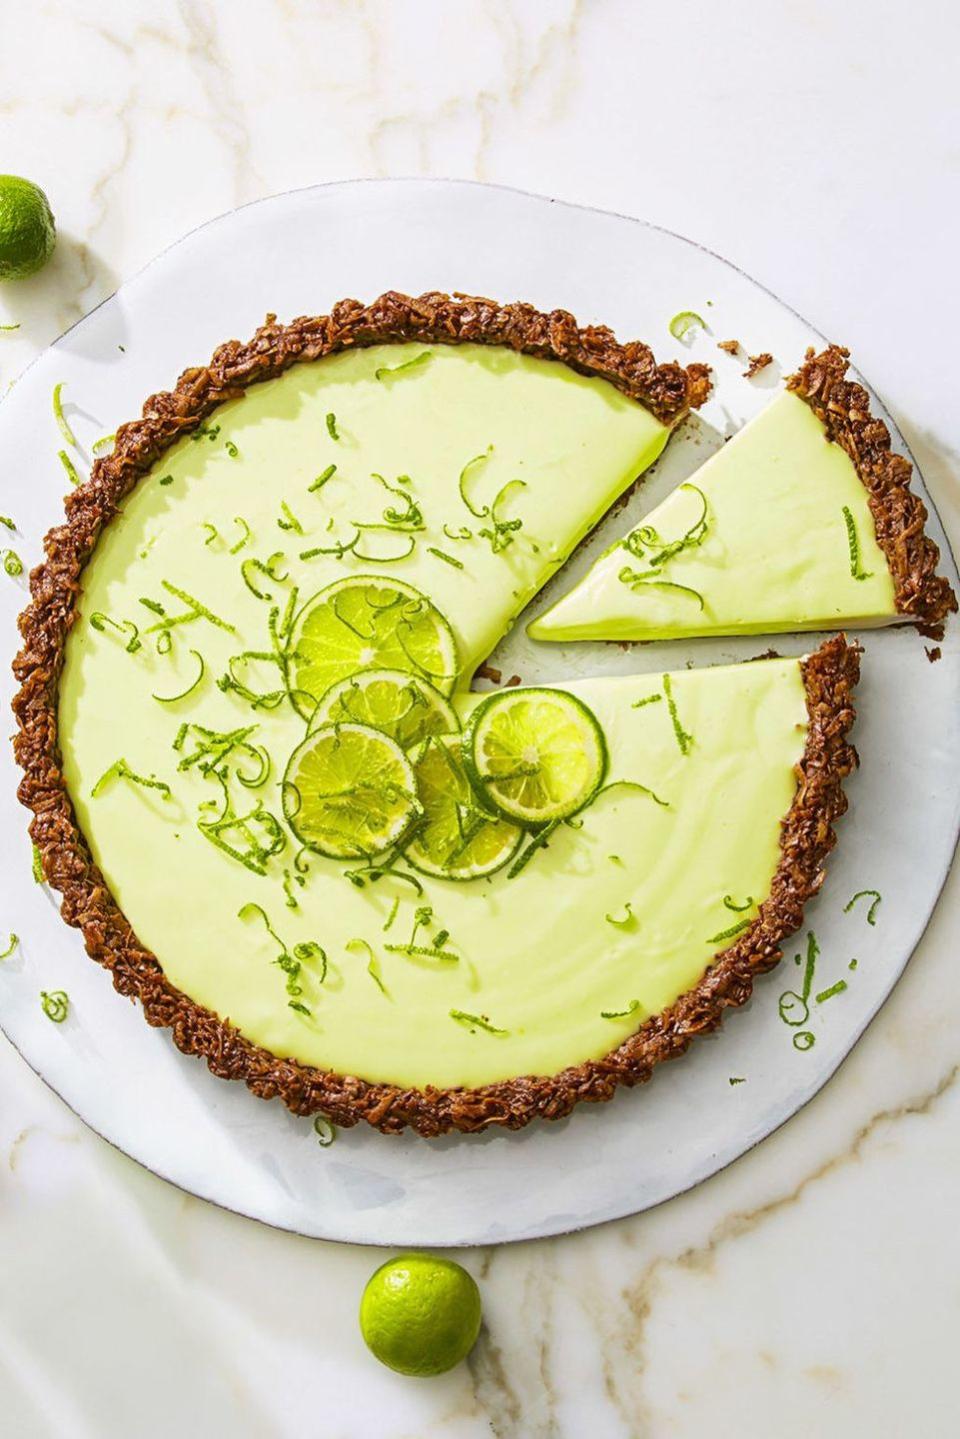 cocoa nutty lime tart with lime garnishes